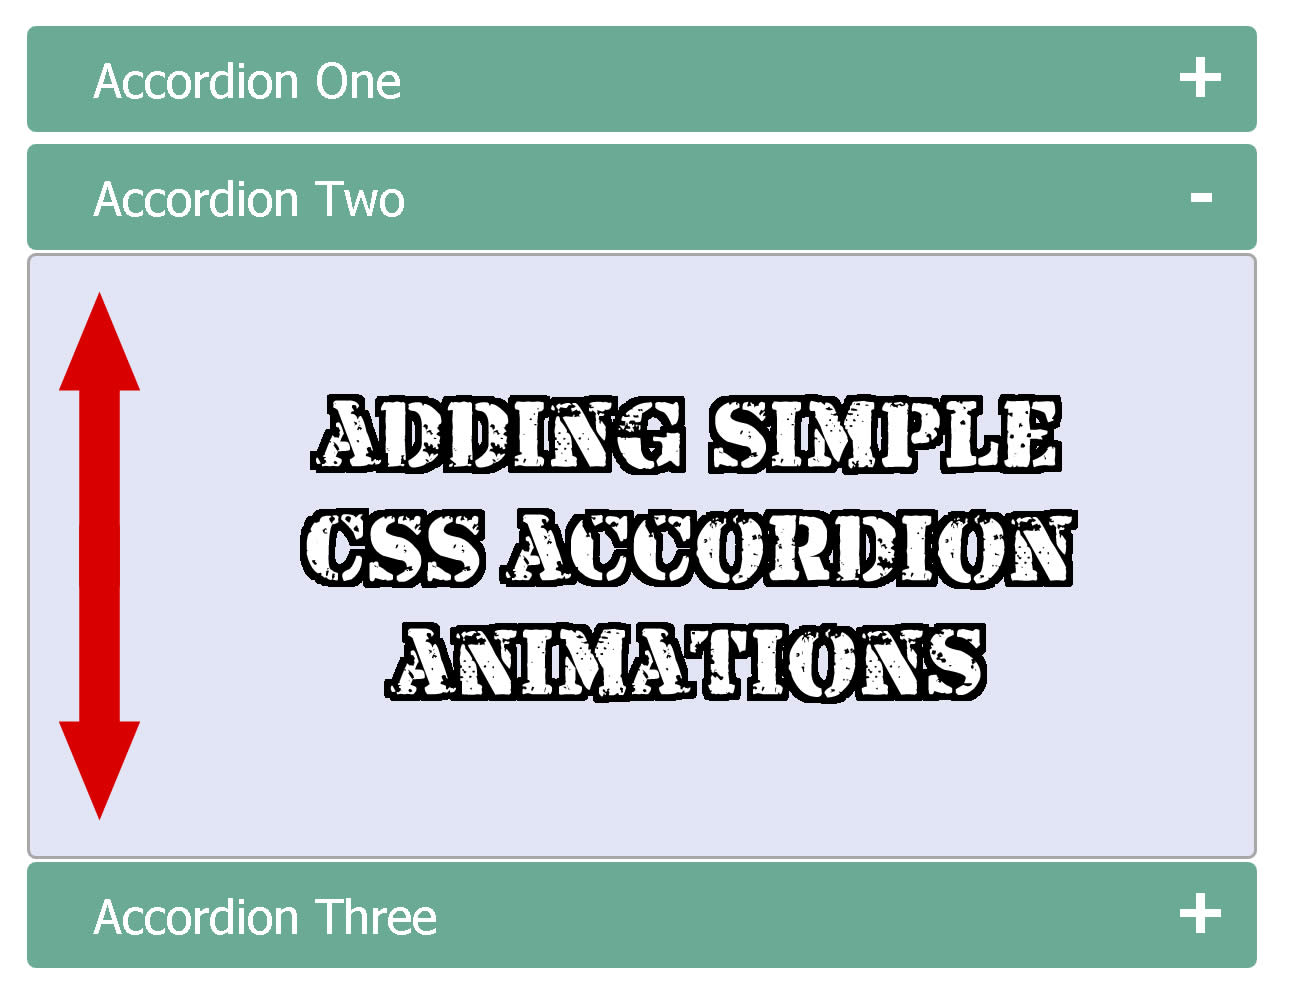 How to create a simple CSS accordion animation